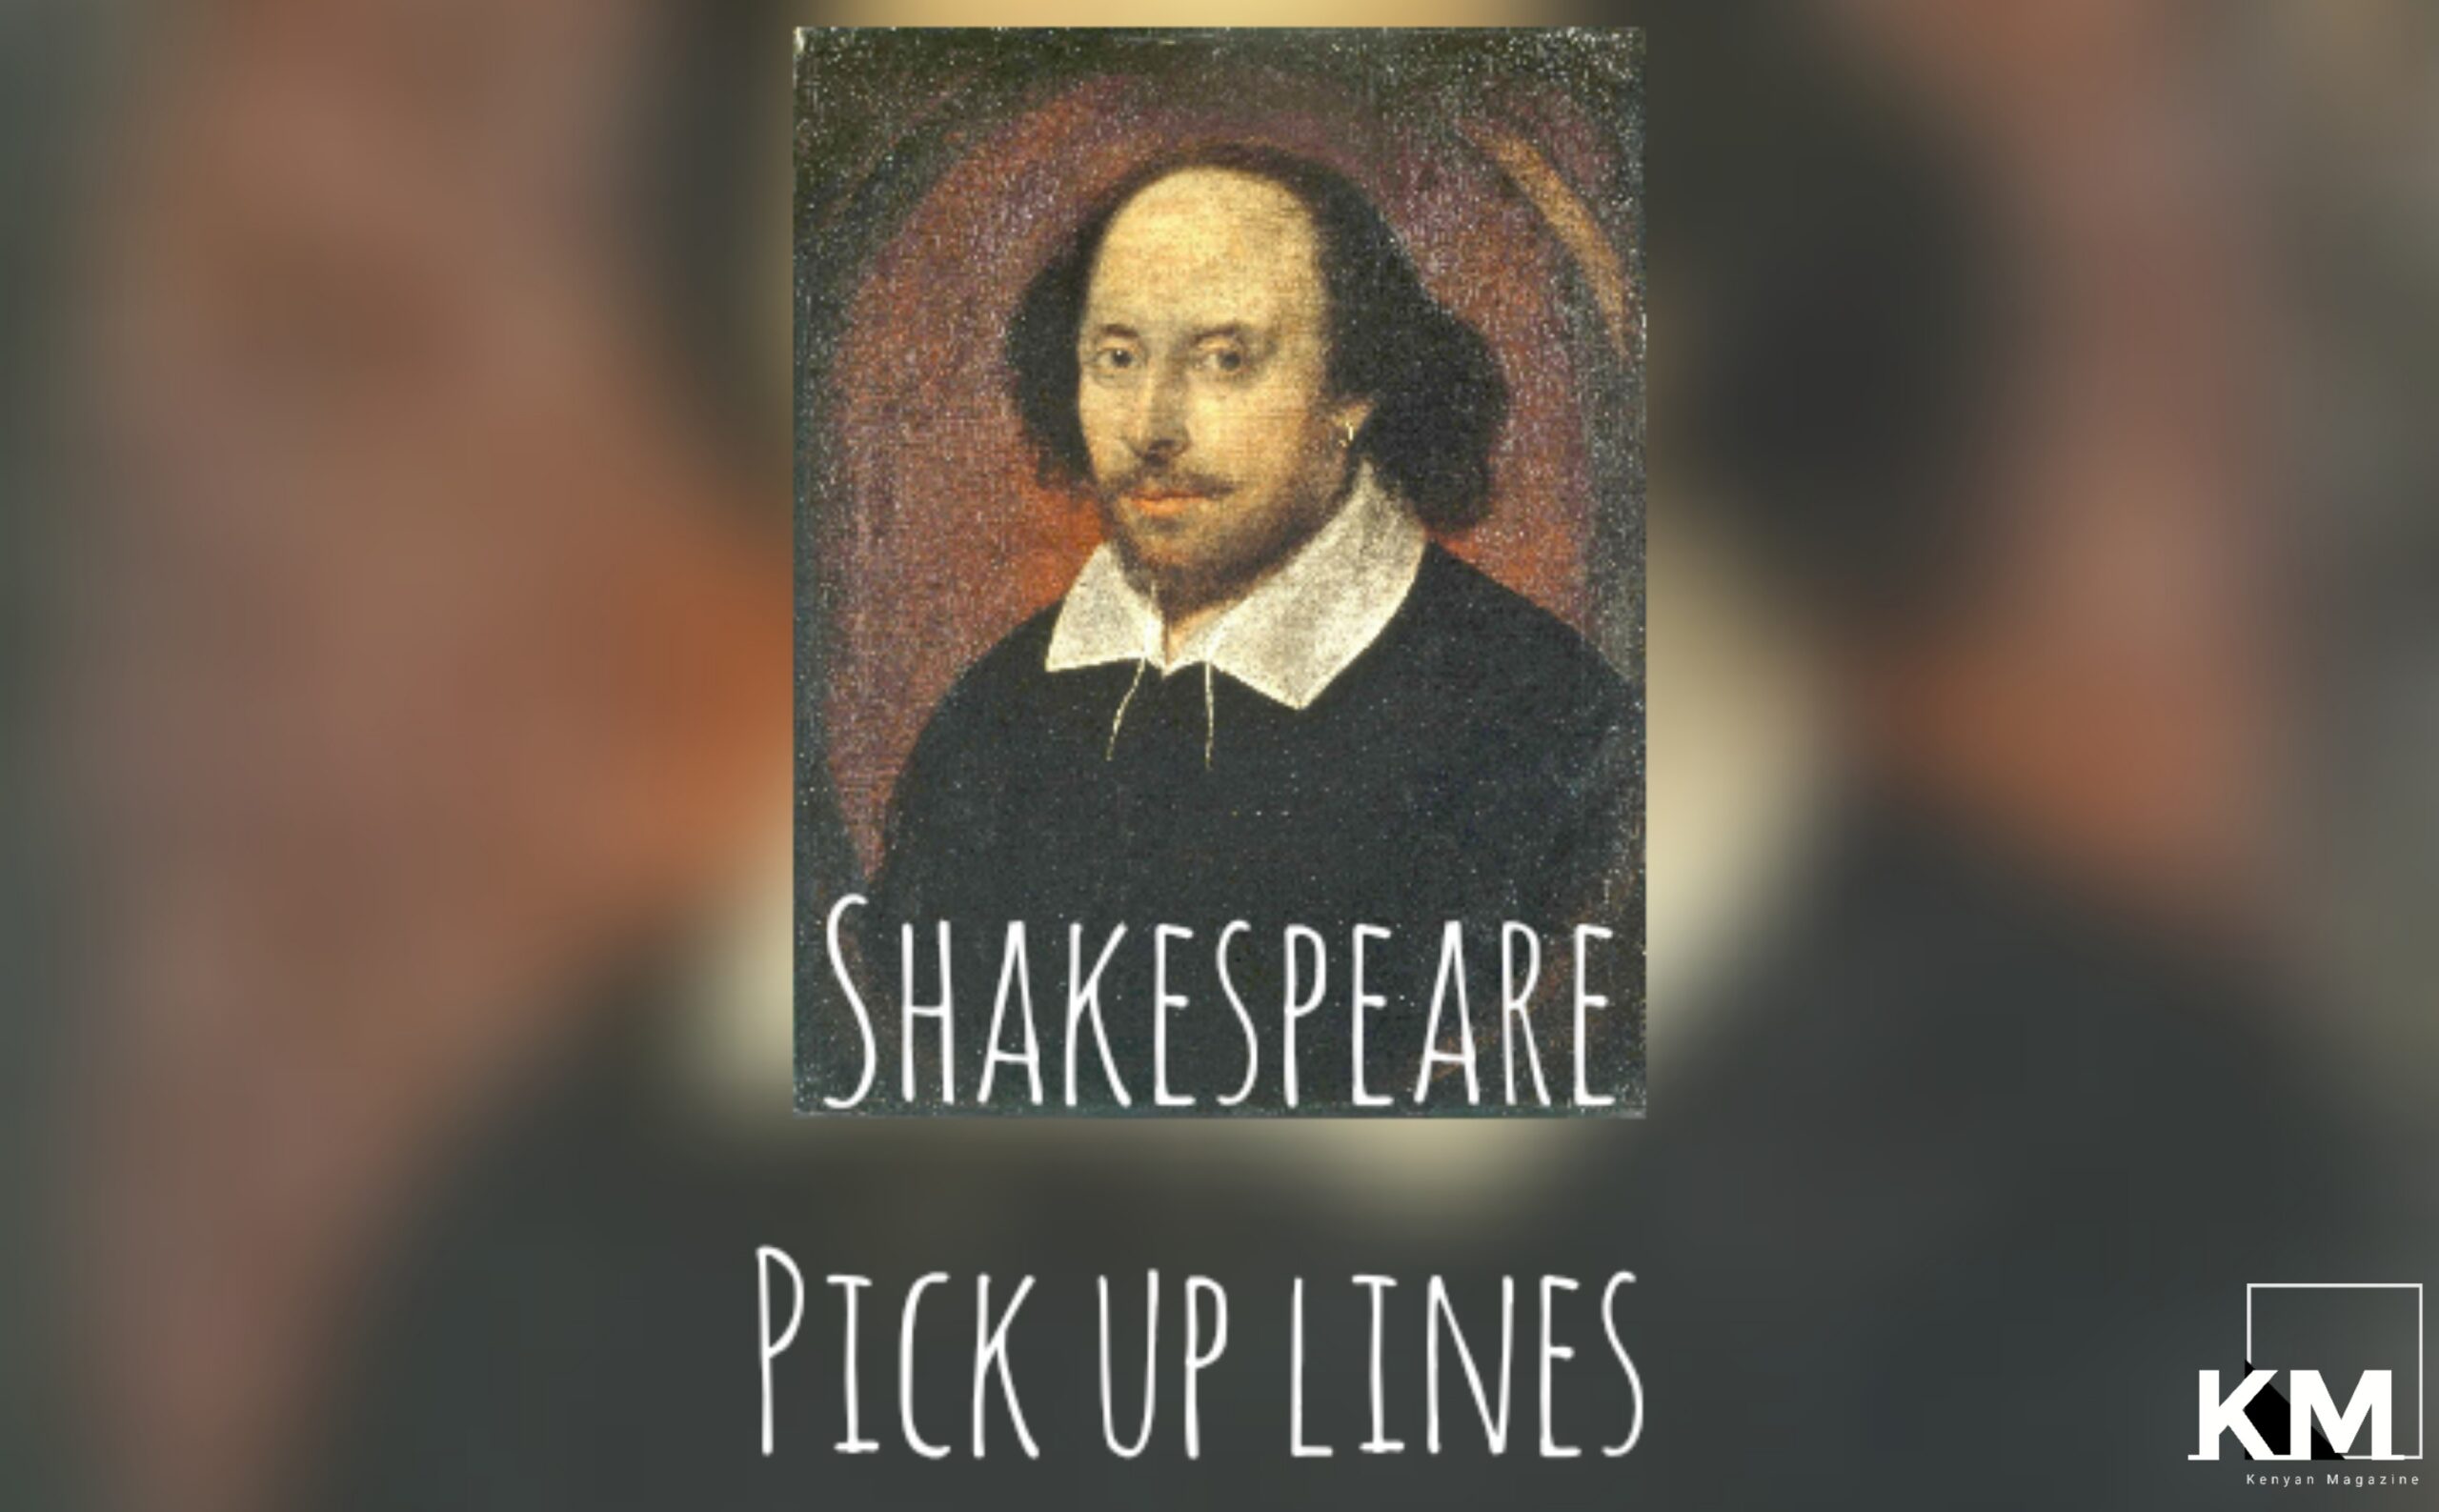 Shakespeare Pick up lines